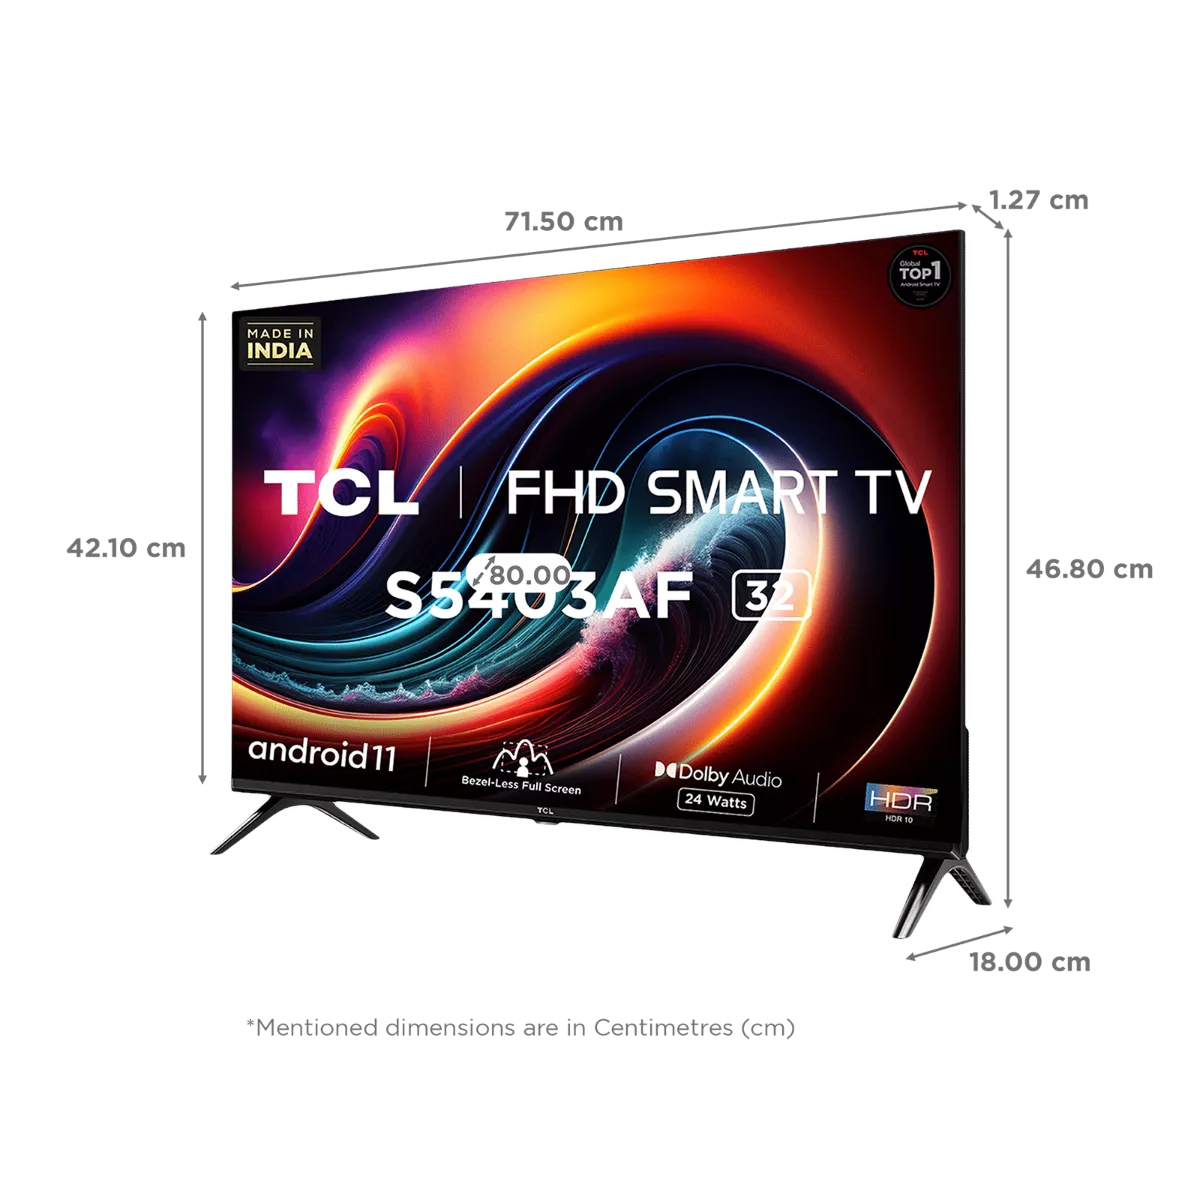 Buy 32 inch TCL Smart LED TV at Best Prices in India